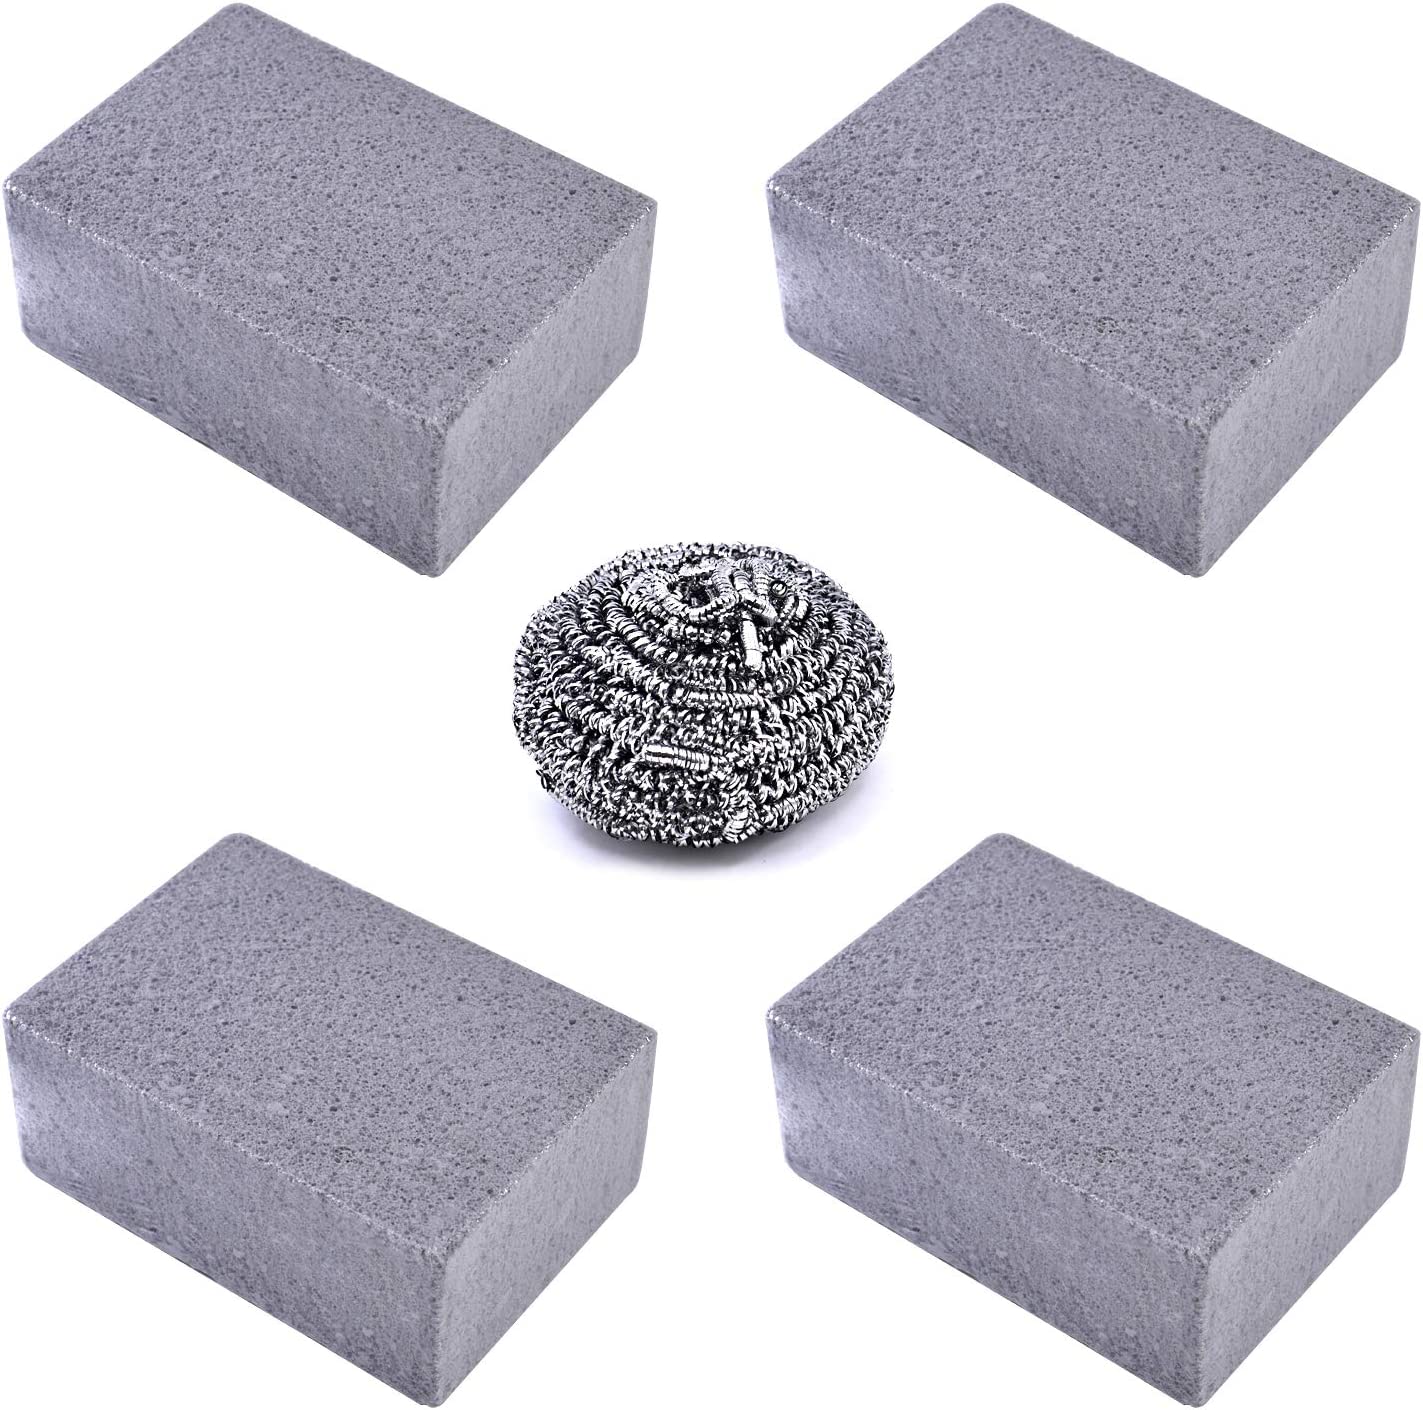 Grill Brick 4 Pack 4" x 1.5" With Metal Scouring Sponge - X002M8WOGR